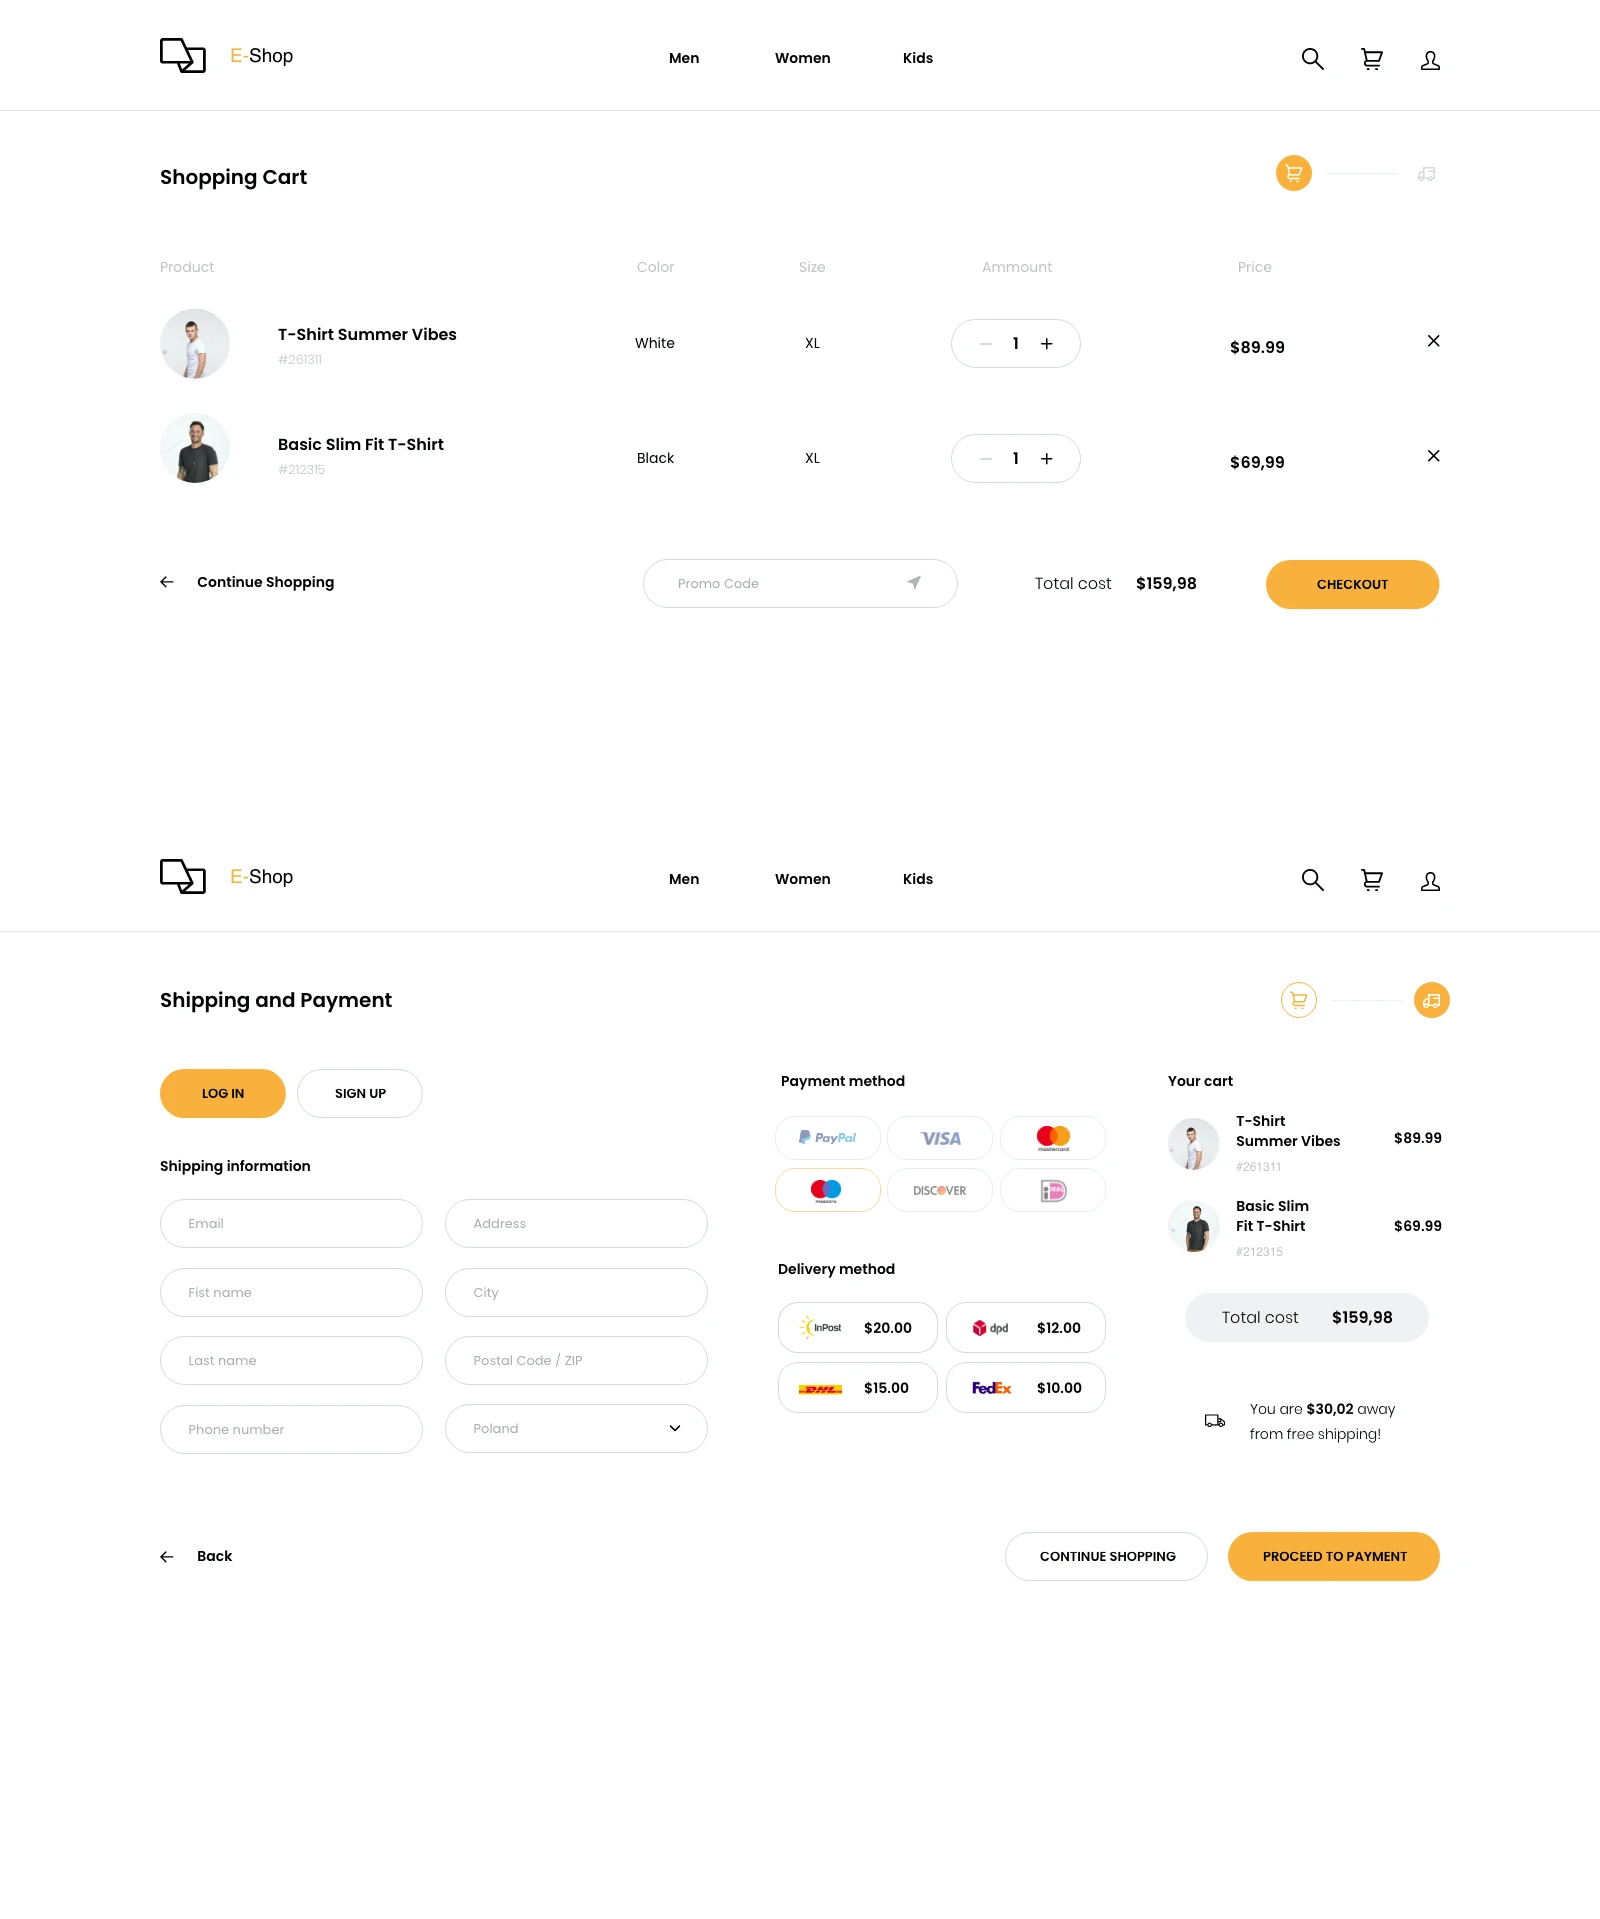 Responsive eCommerce UI Kit for Adobe XD - Designed for both web and mobile, this UI kit redefines user experience through simplicity and calculated design choices. This freebie contains everything an online store needs to get up and running.